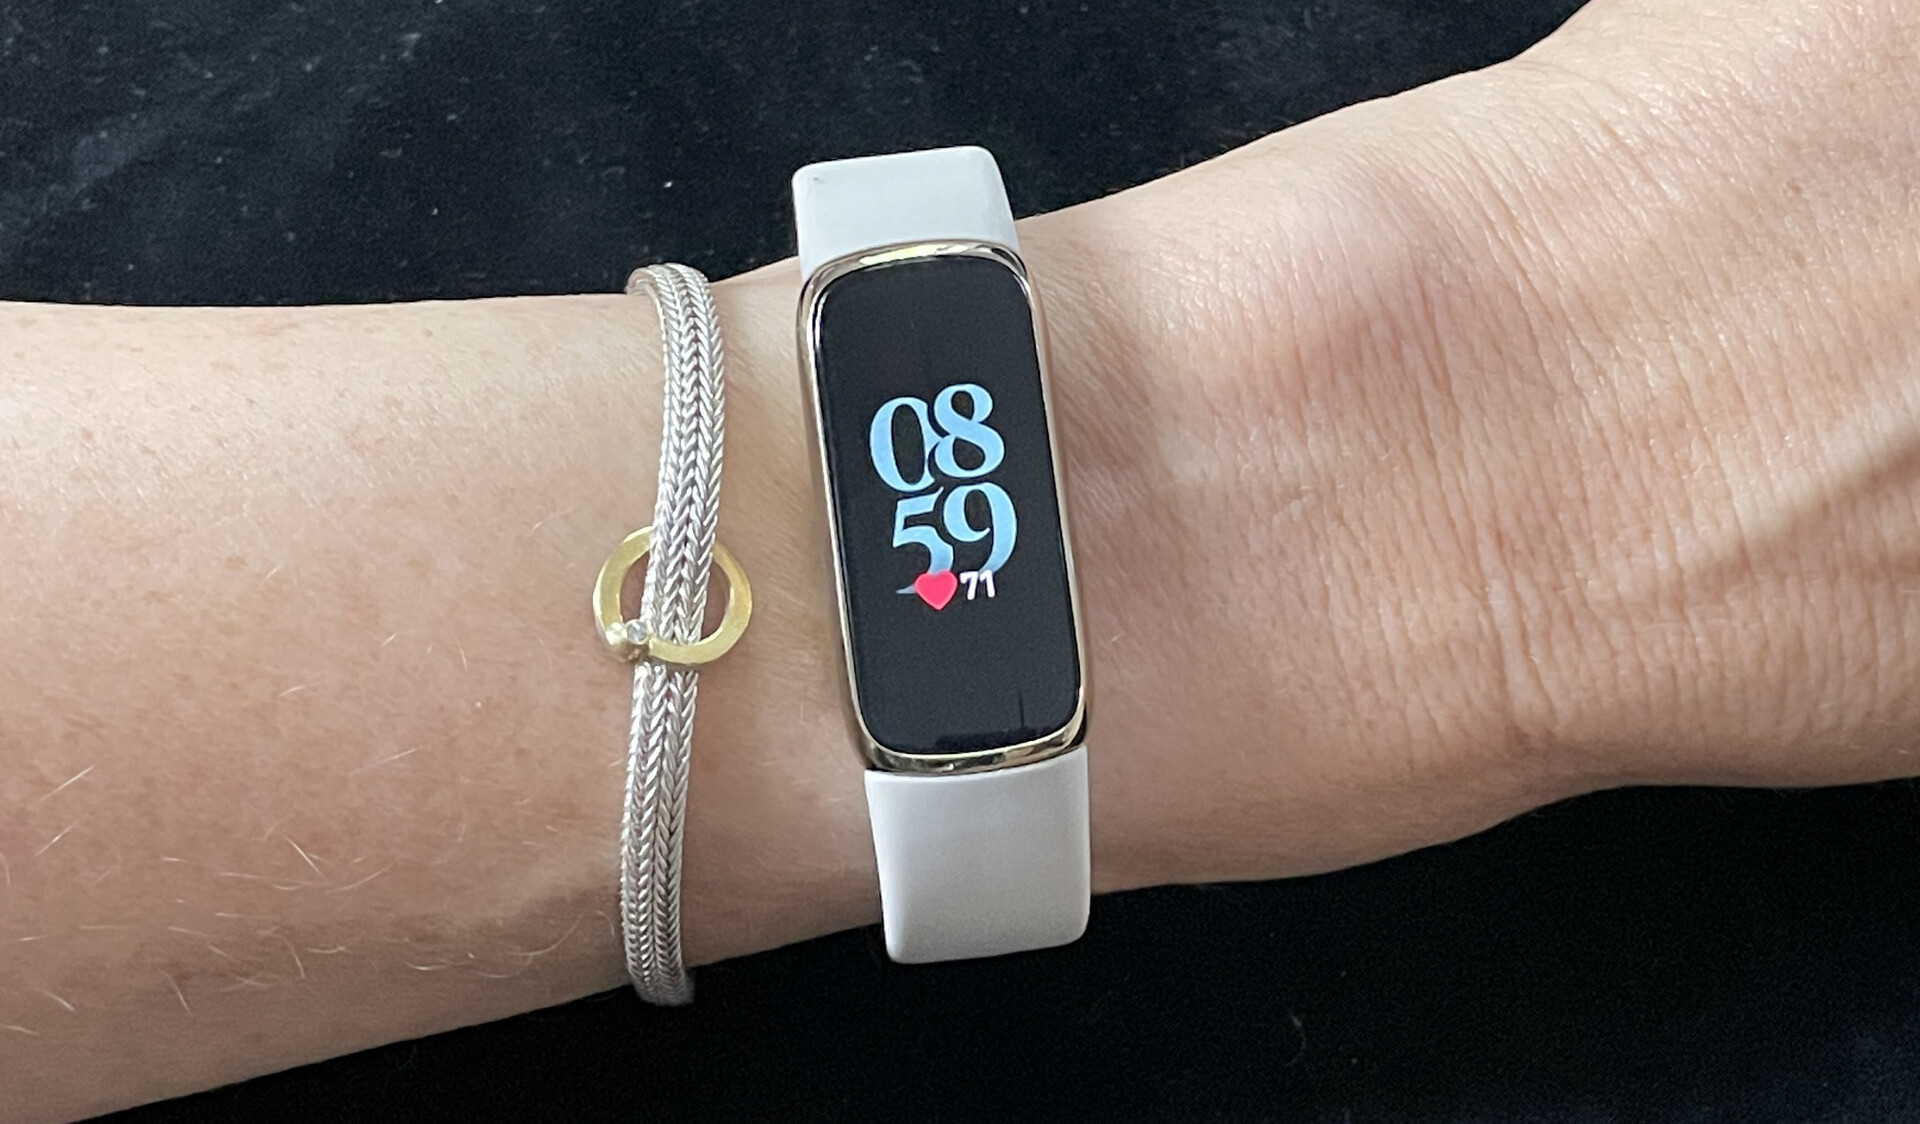 moving ahead with Fitbit luxe